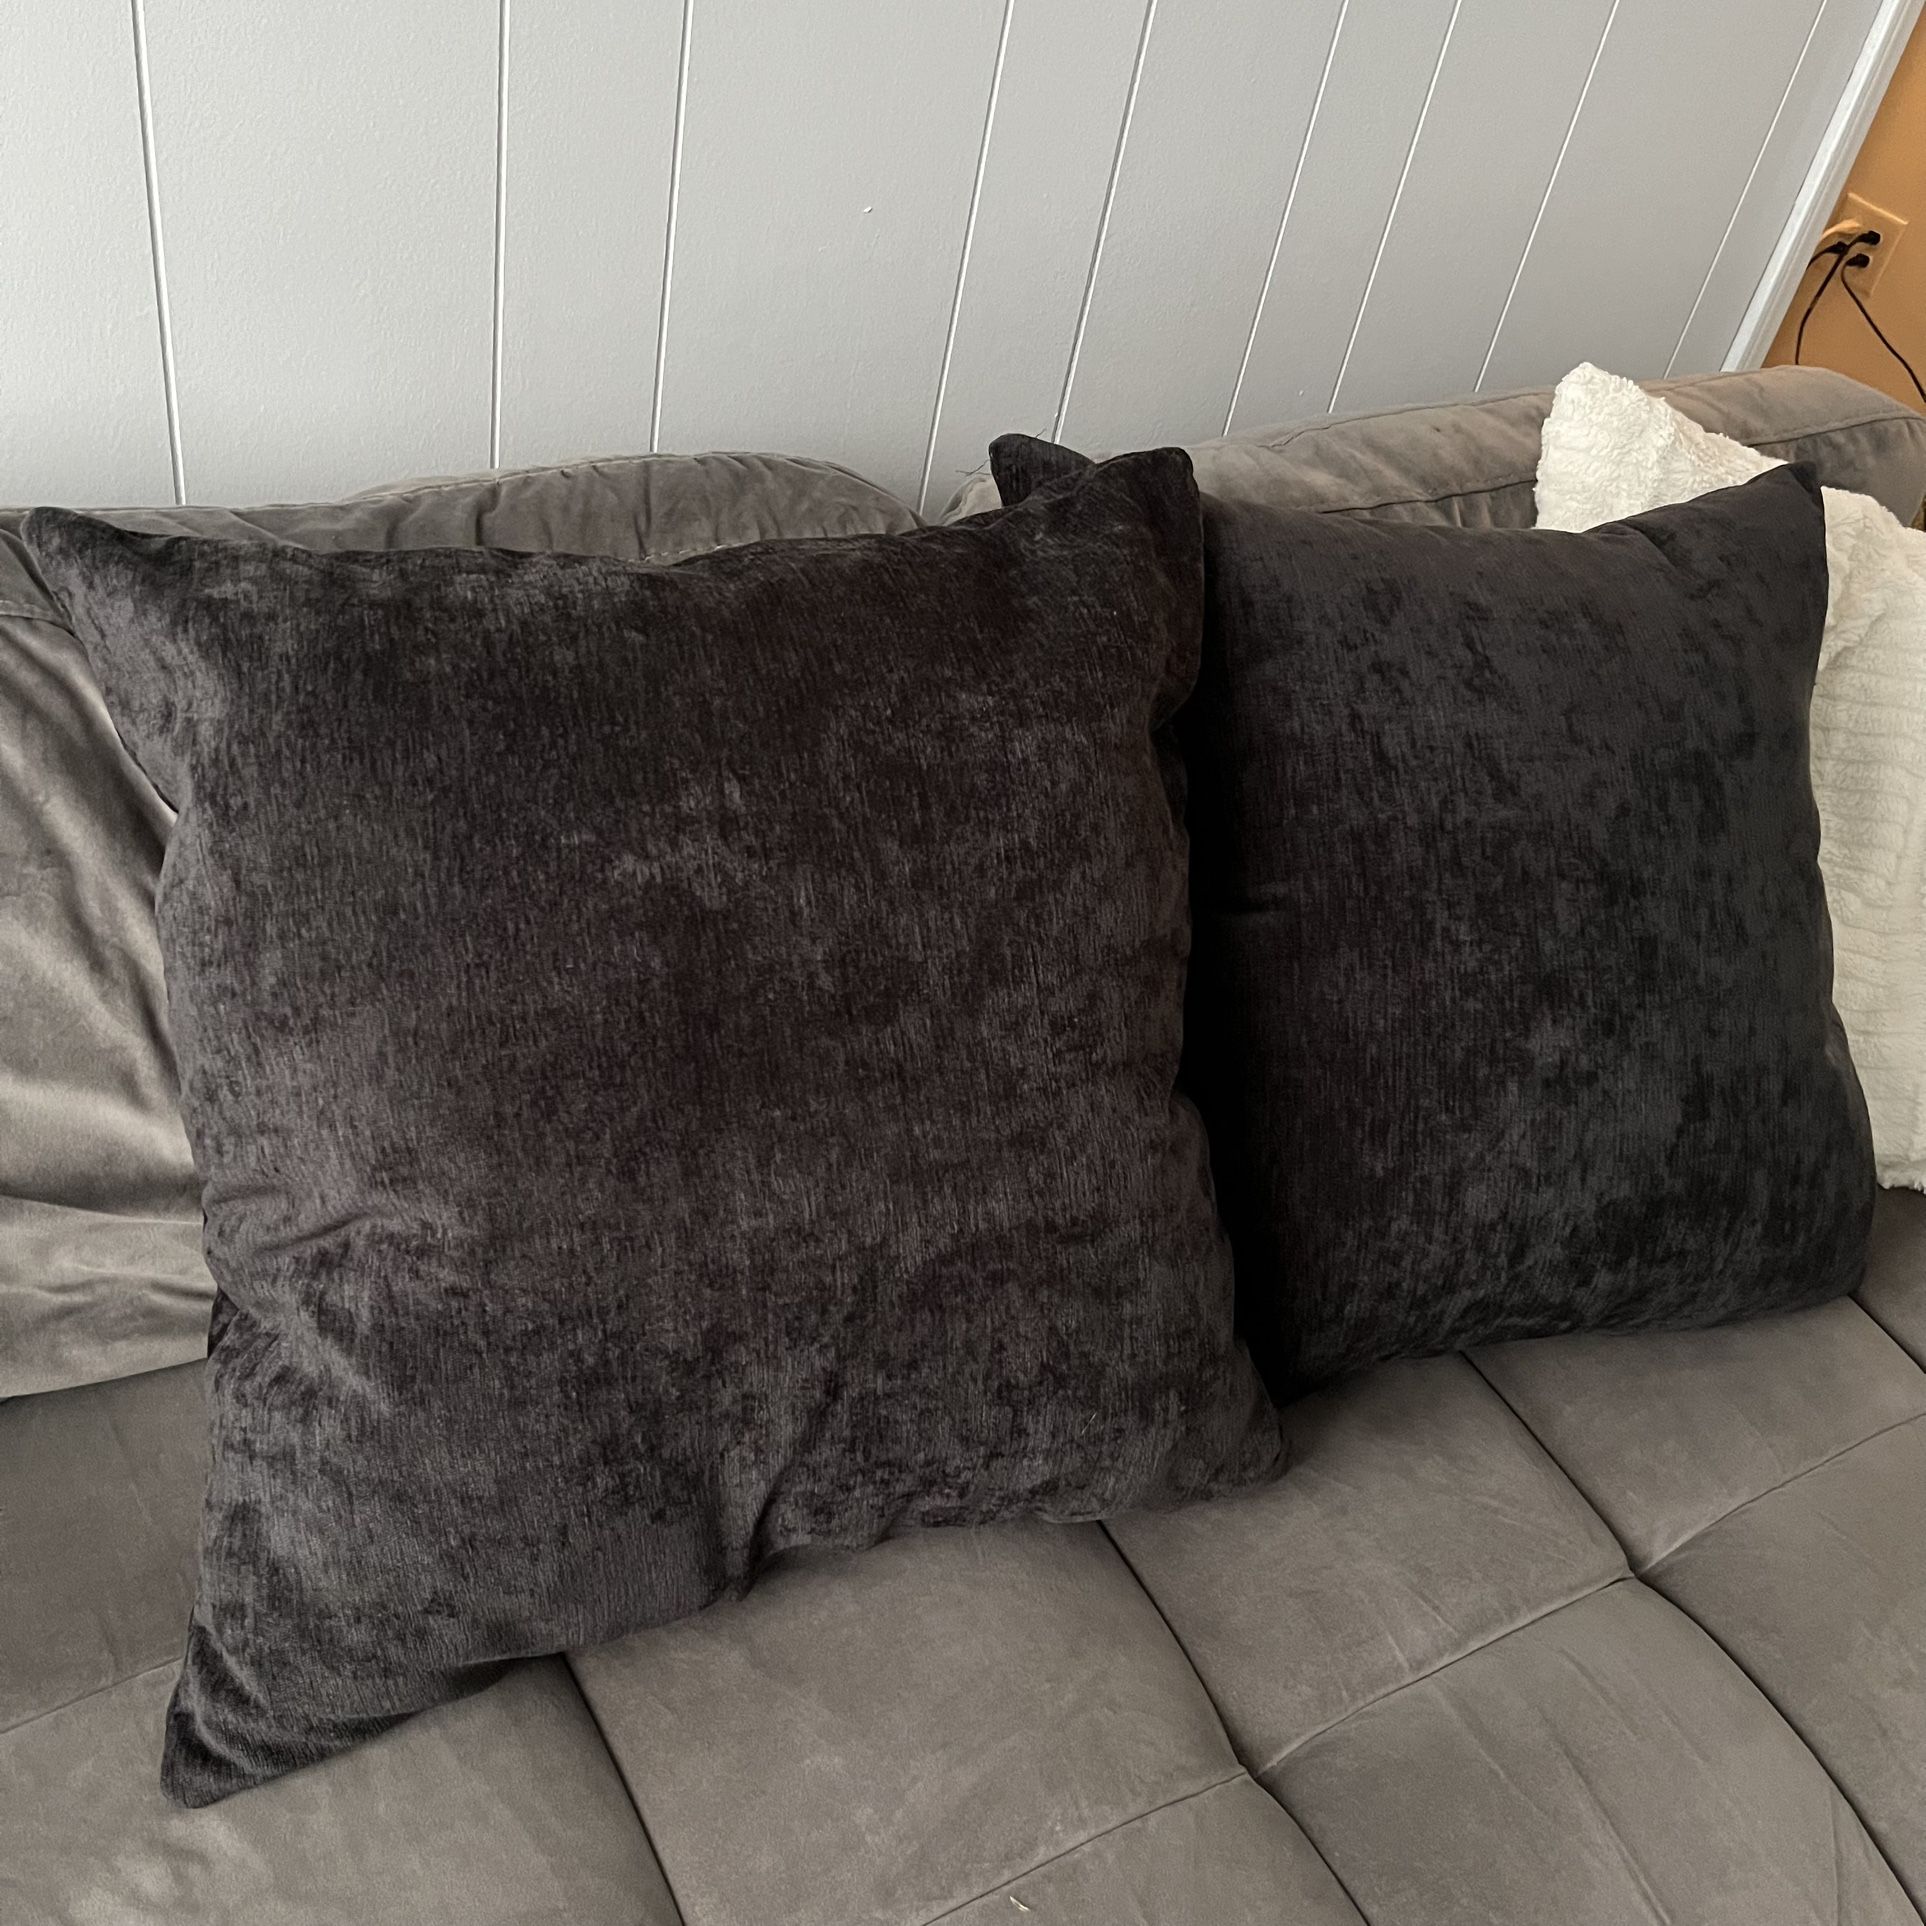 Decorative Black Couch Bed Pillows